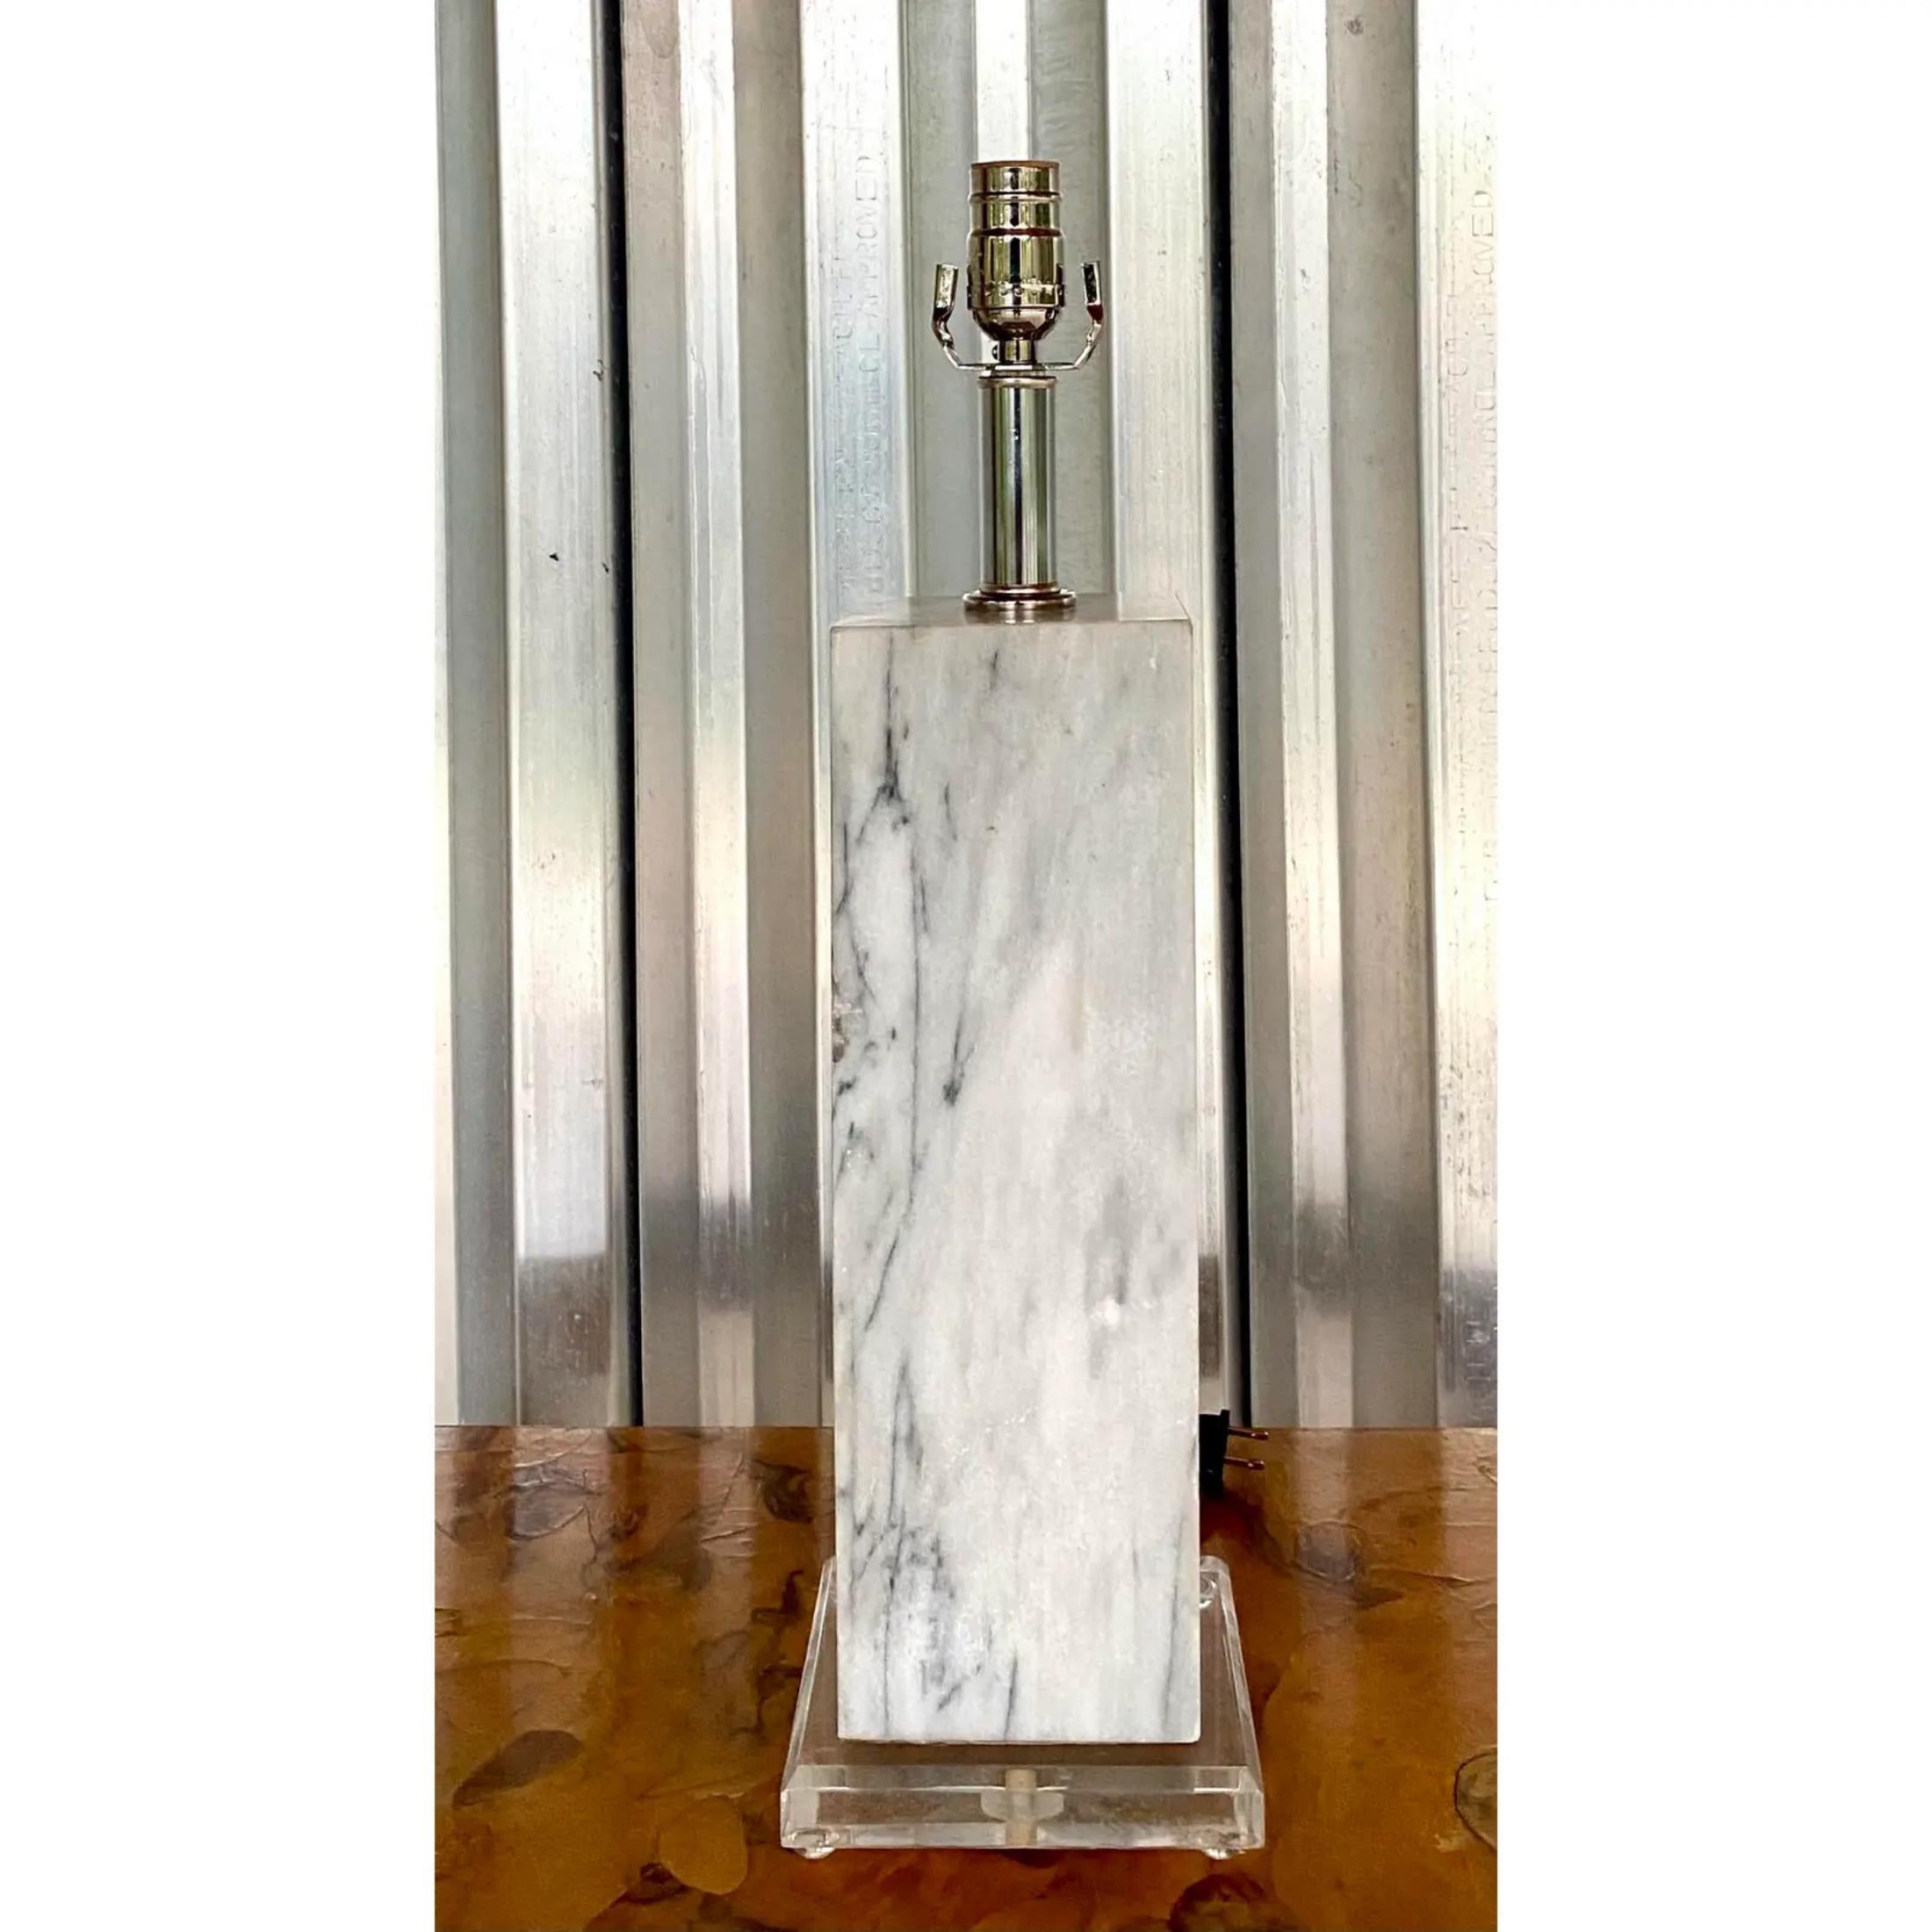 Fantastic vintage MCM marble block lamp. Chic and simple body on a lucite plinth. Completely rewired and restored with all new wiring and polished chrome hardware. Acquired from a Palm Beach estate